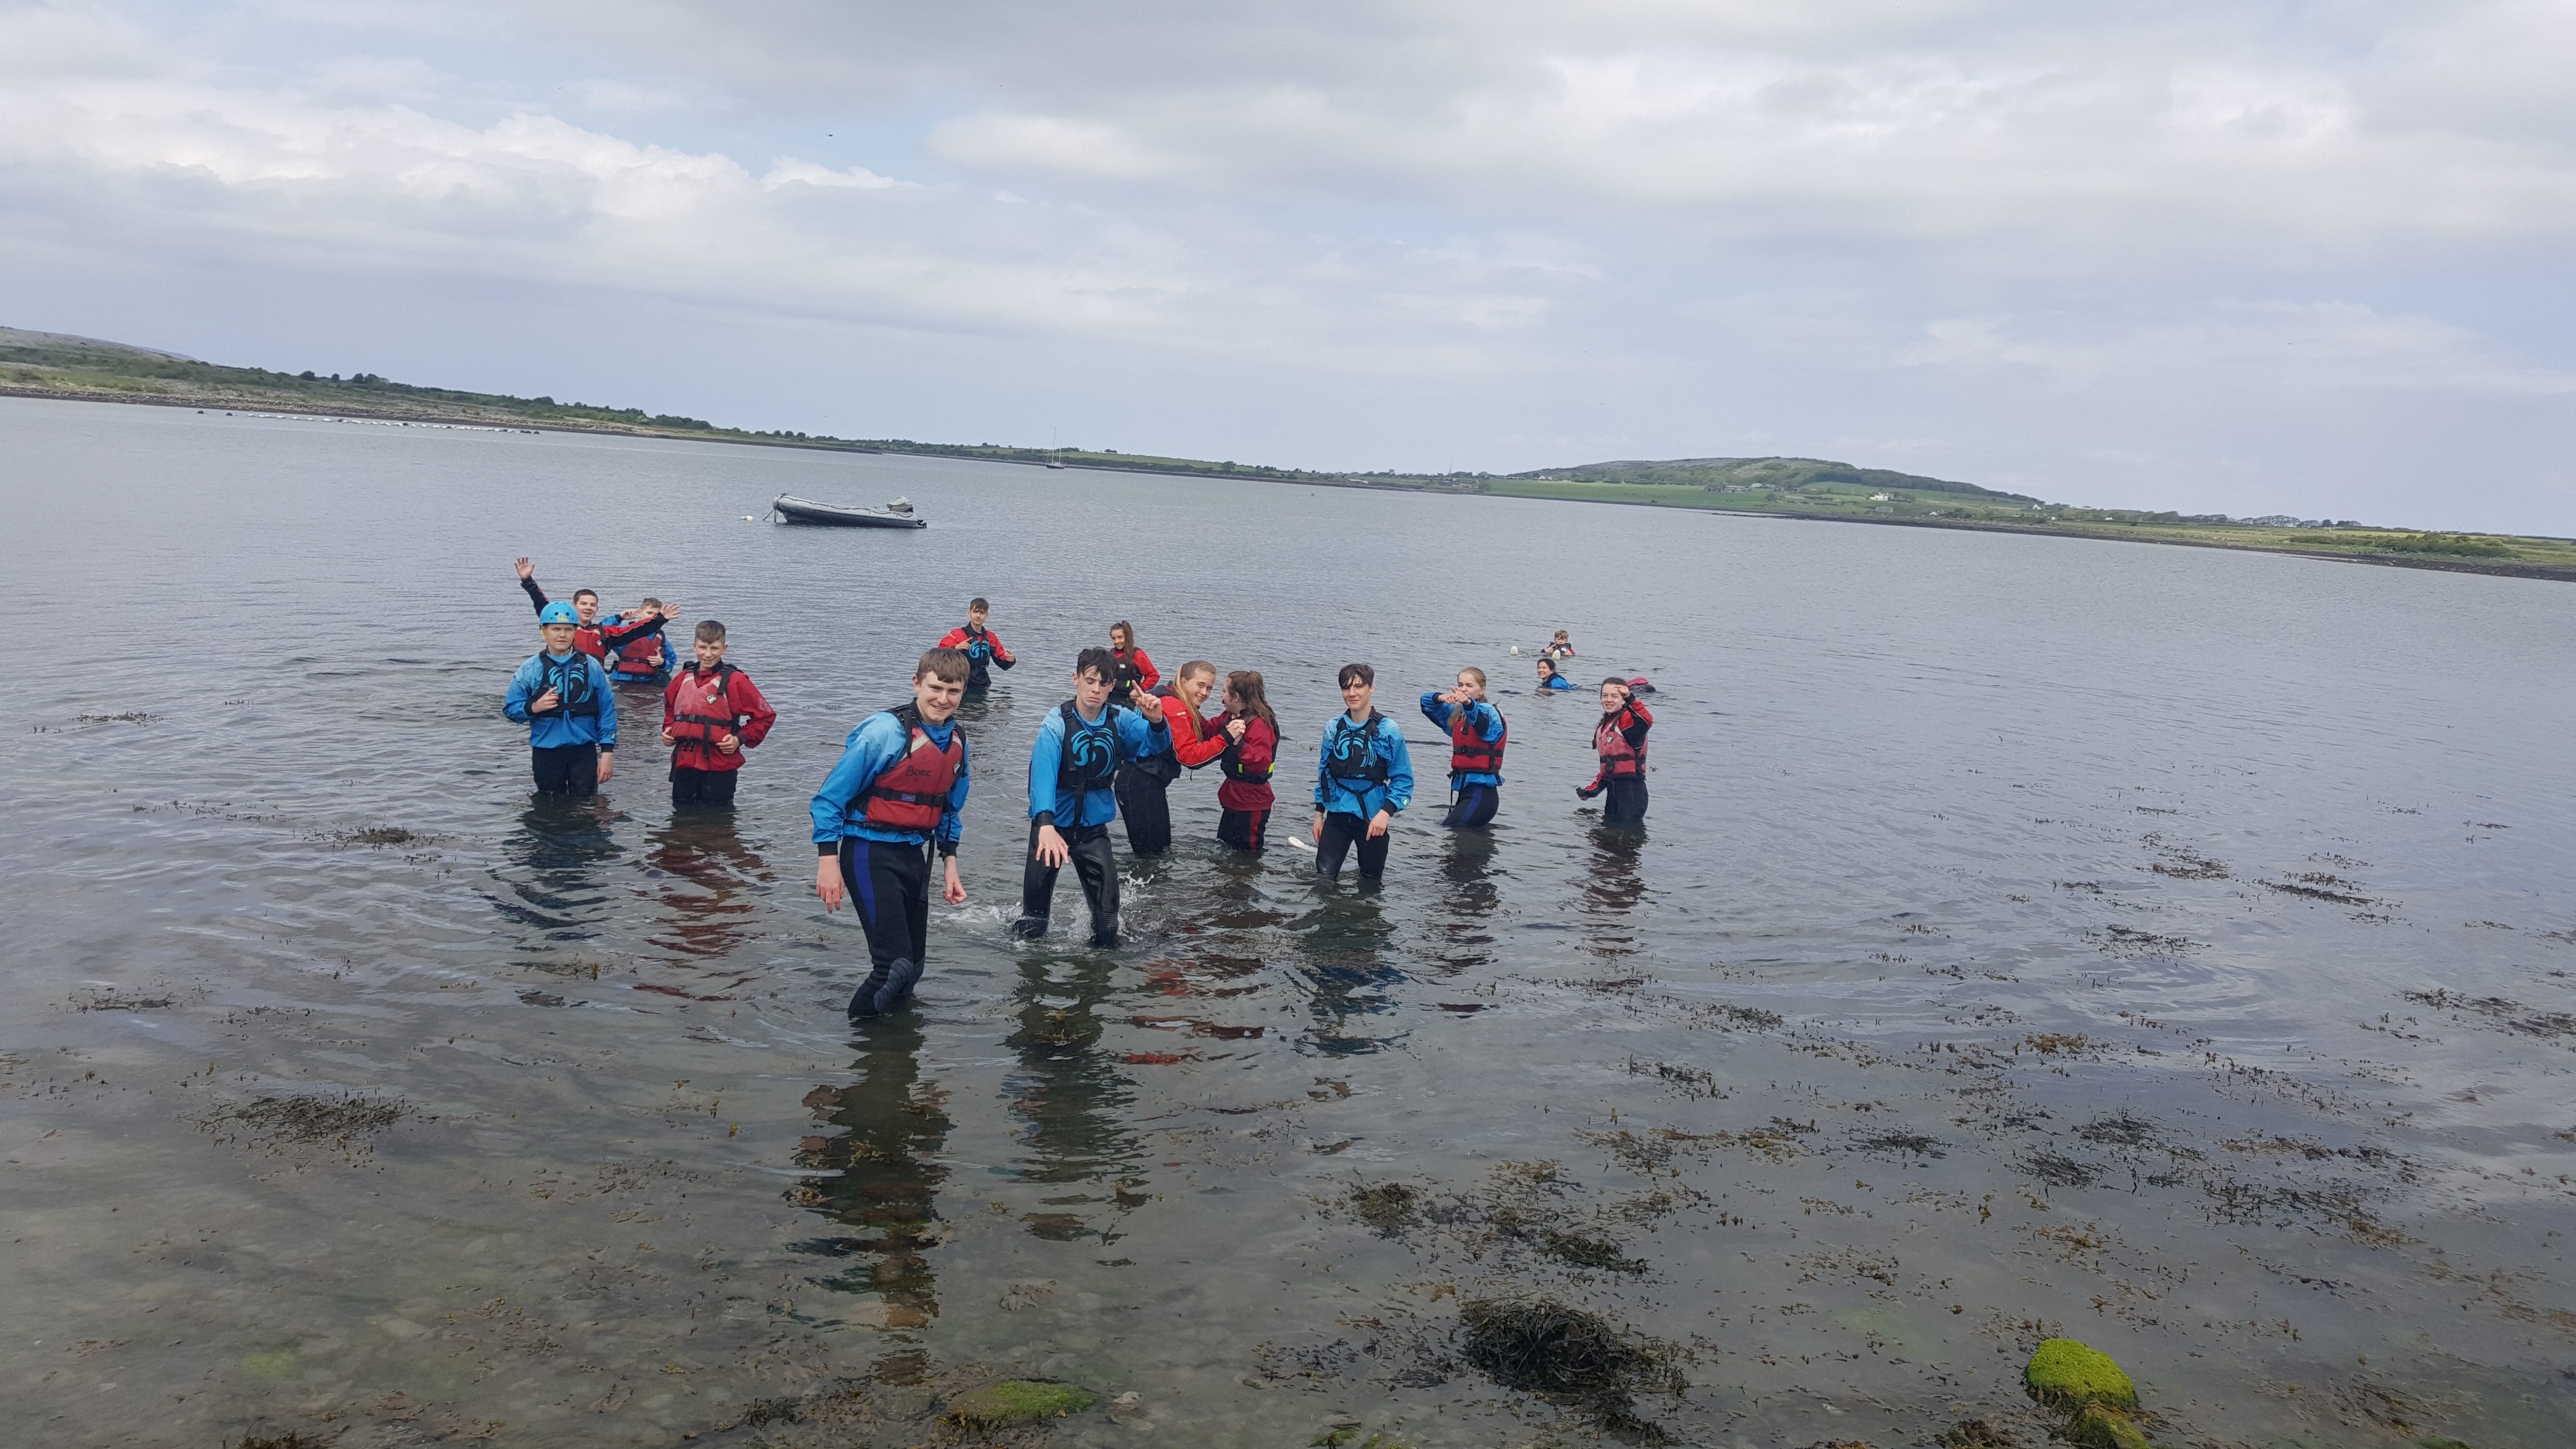 16th May 2018: Desmond College 1st Year Students on their Trip to the Burren